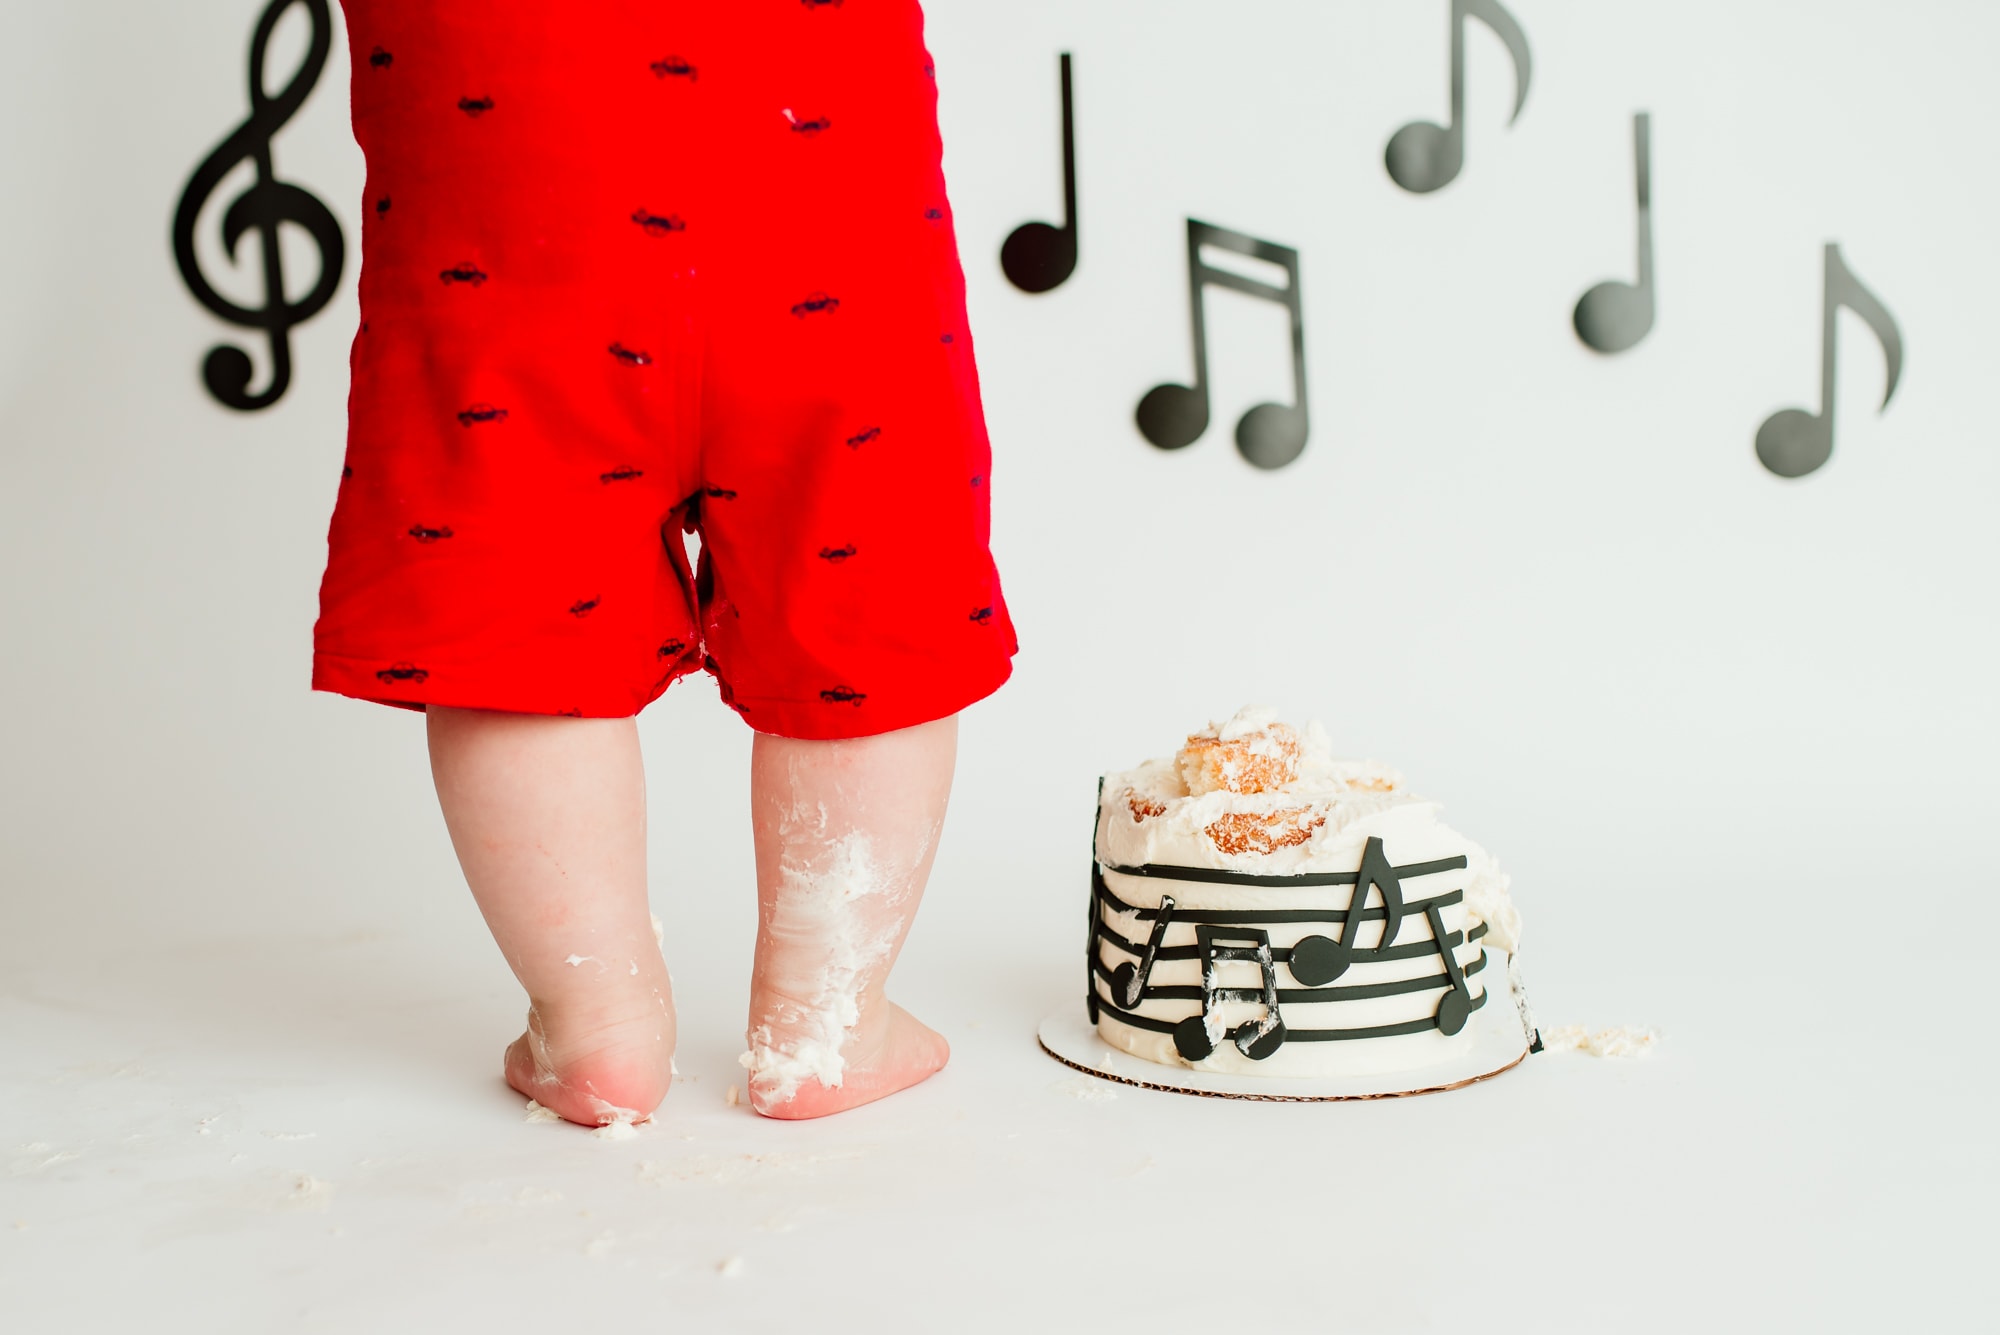 Just the chubby legs of a boy in bright red overalls during his music themed cake smash.